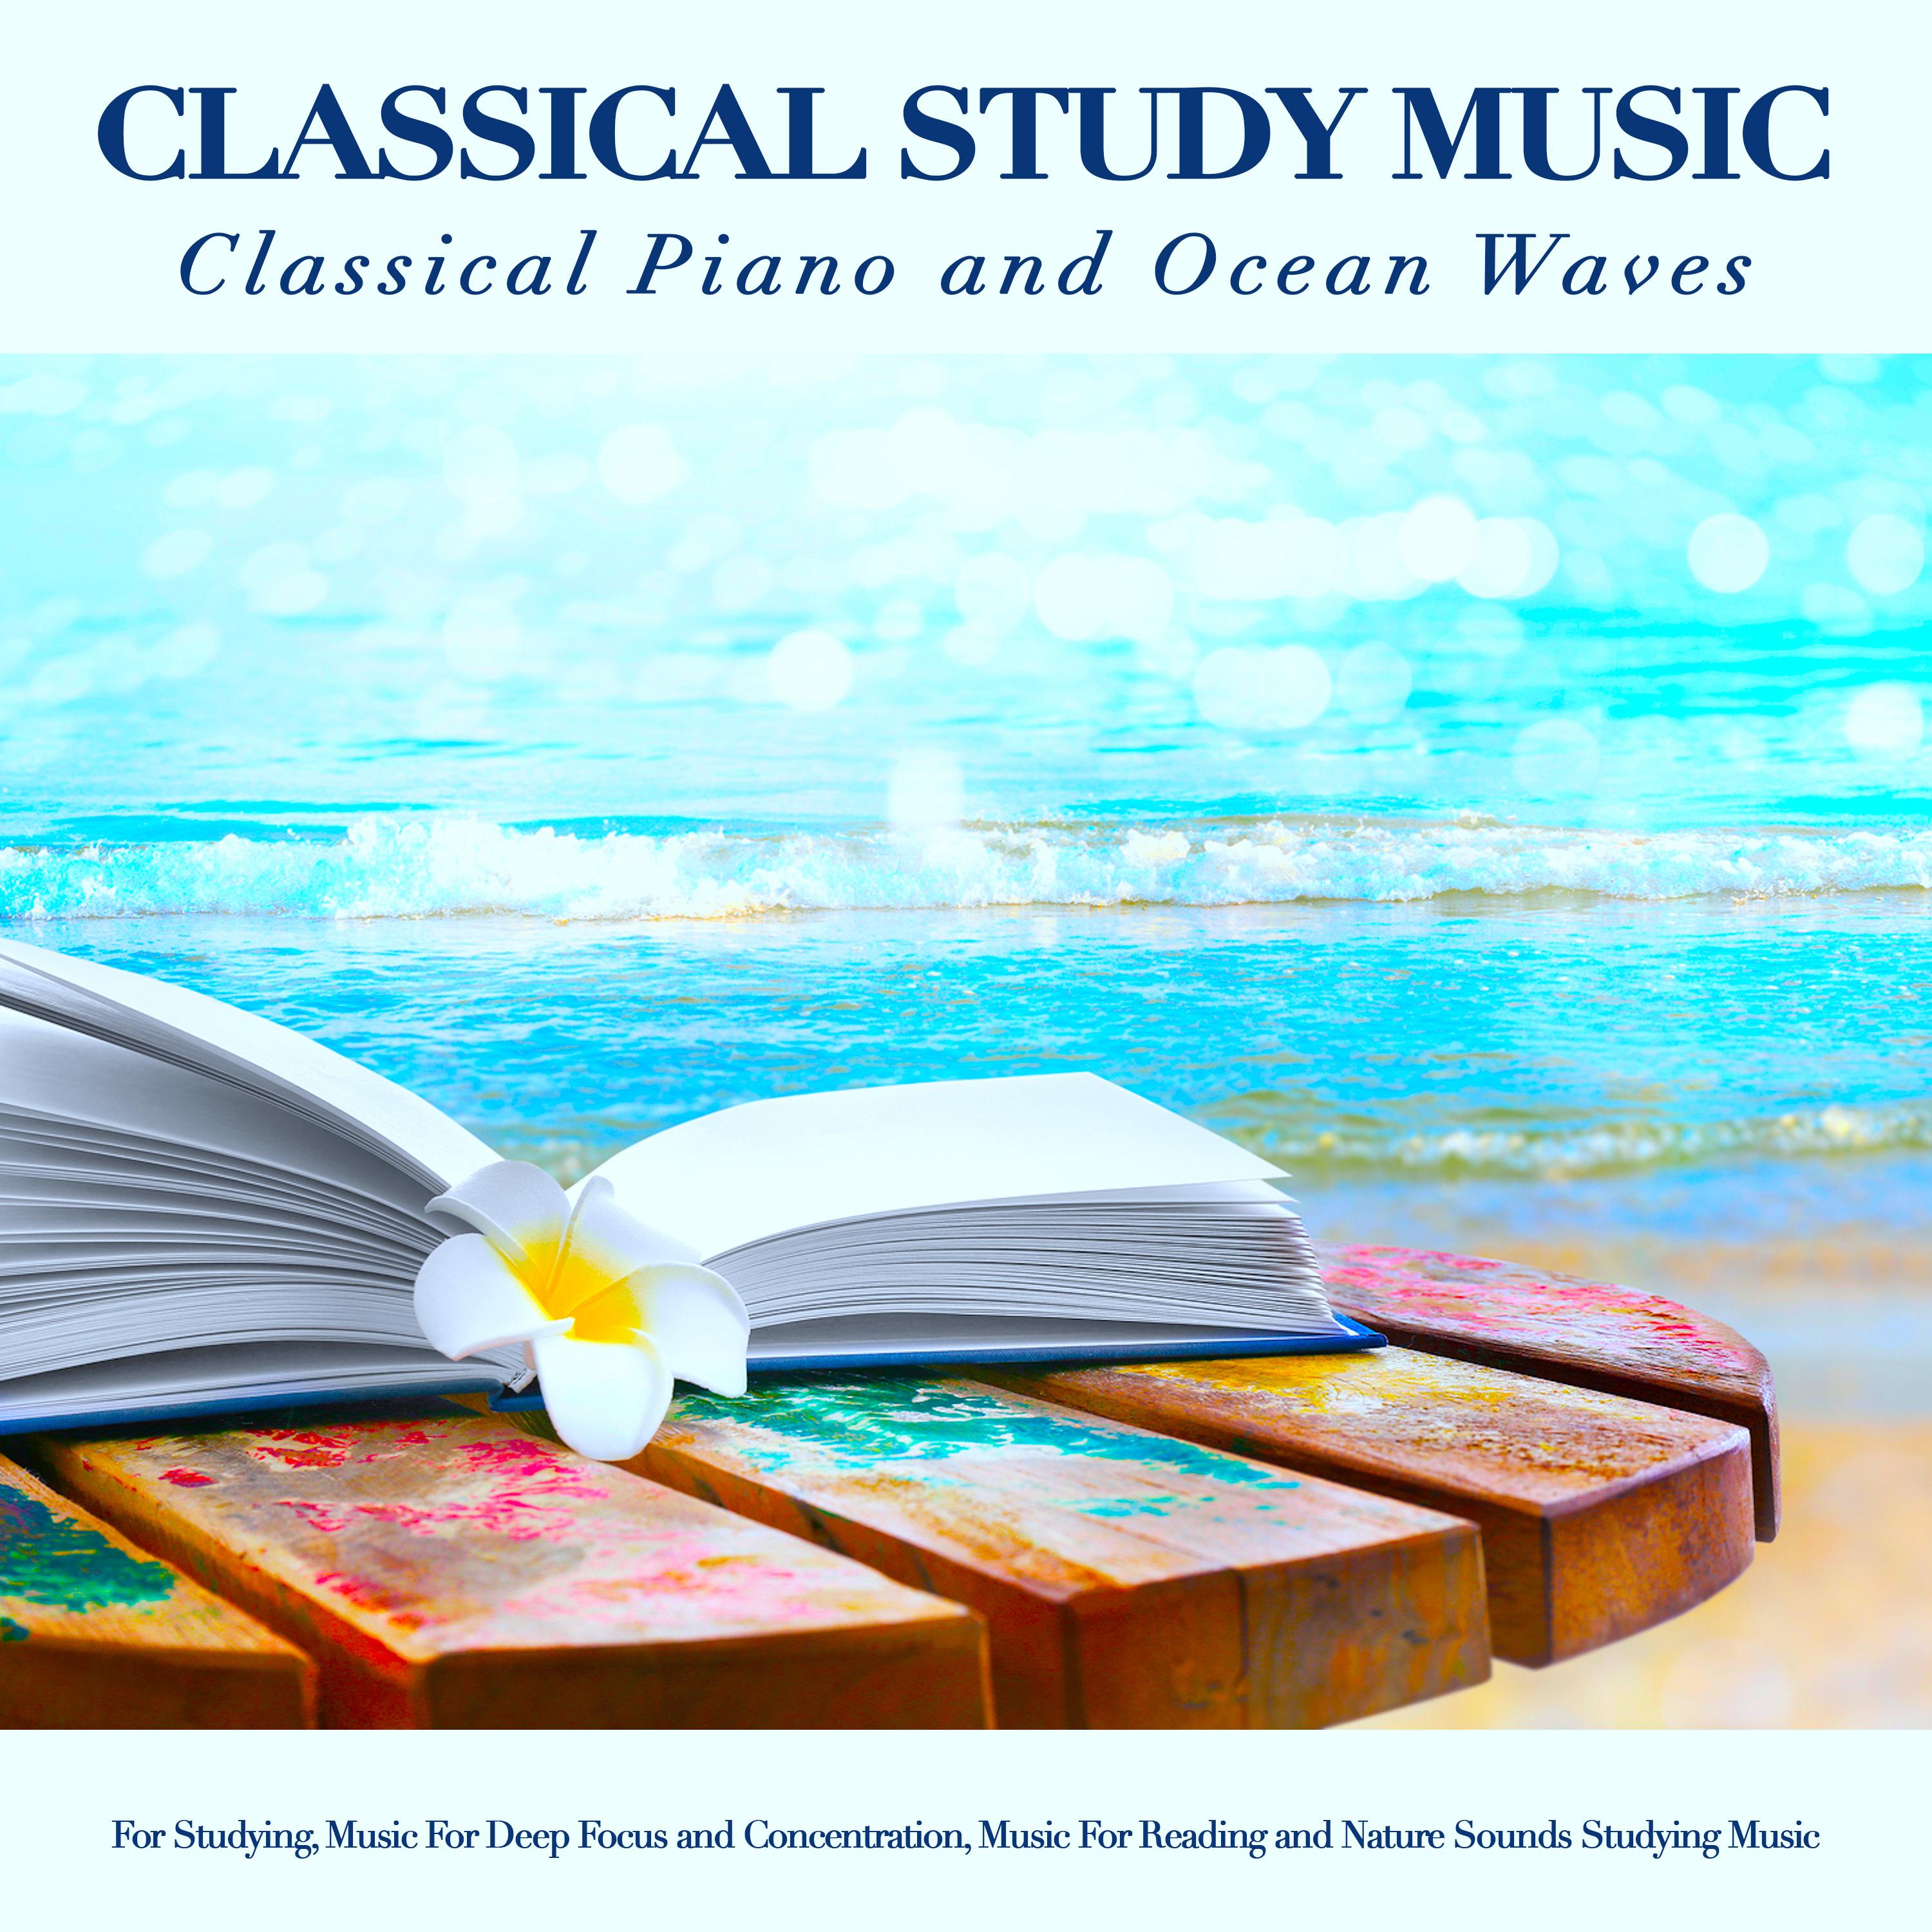 Rhapsody In Blue - Gershwin - Classical Study Music - Ocean Waves Sounds - Classical Piano for Studying